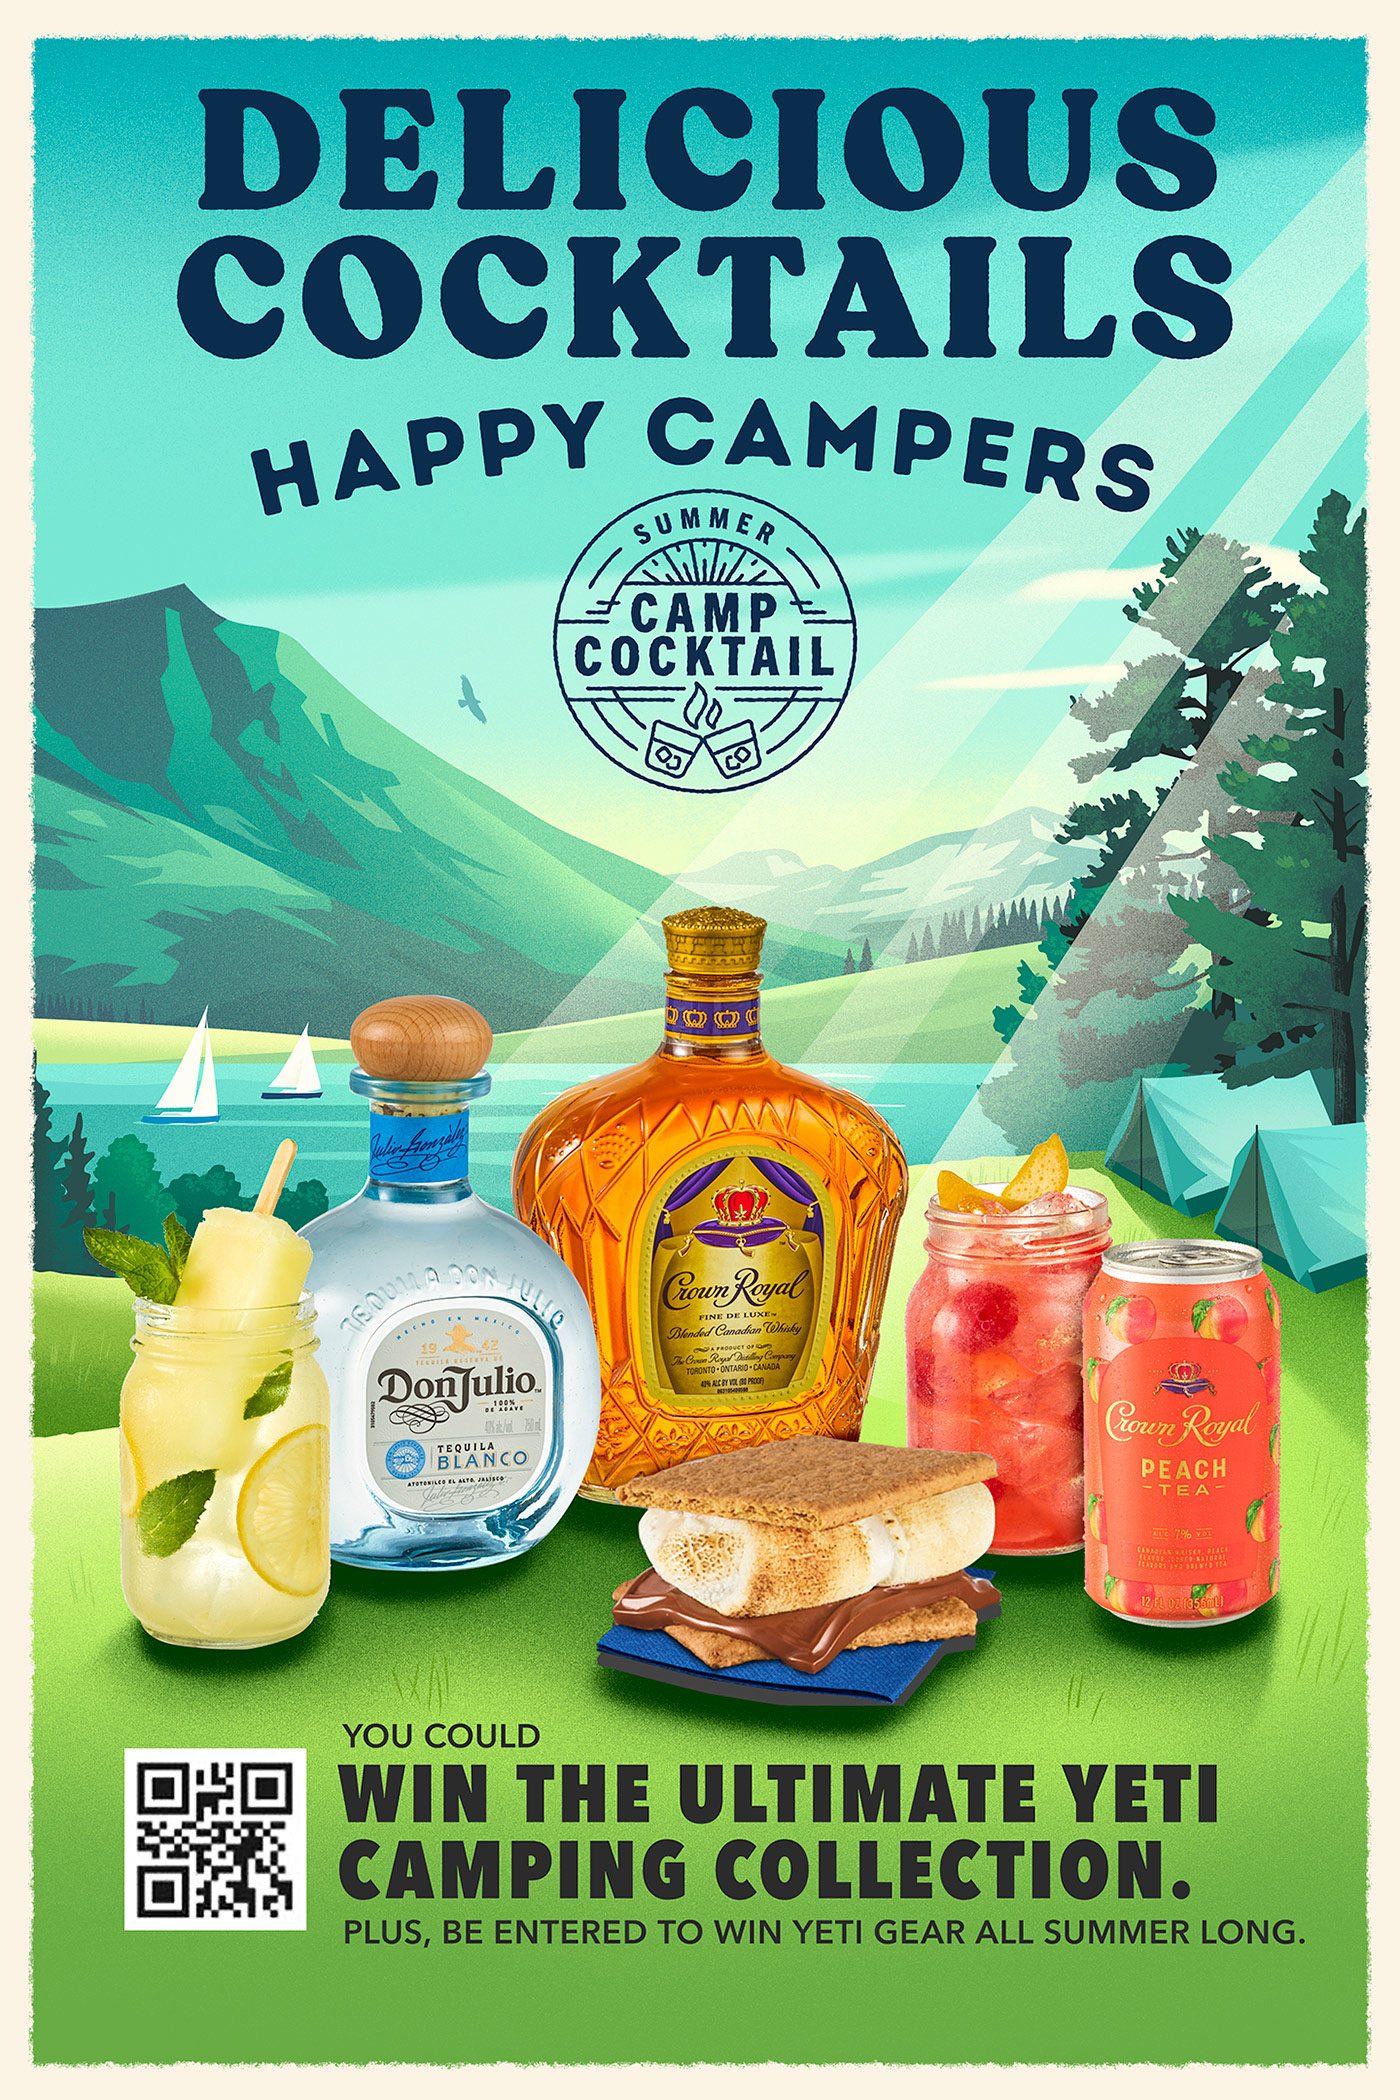 posters outdoors retro illustration Michael Crampton travel poster camping adventure branding  National Park travel posters